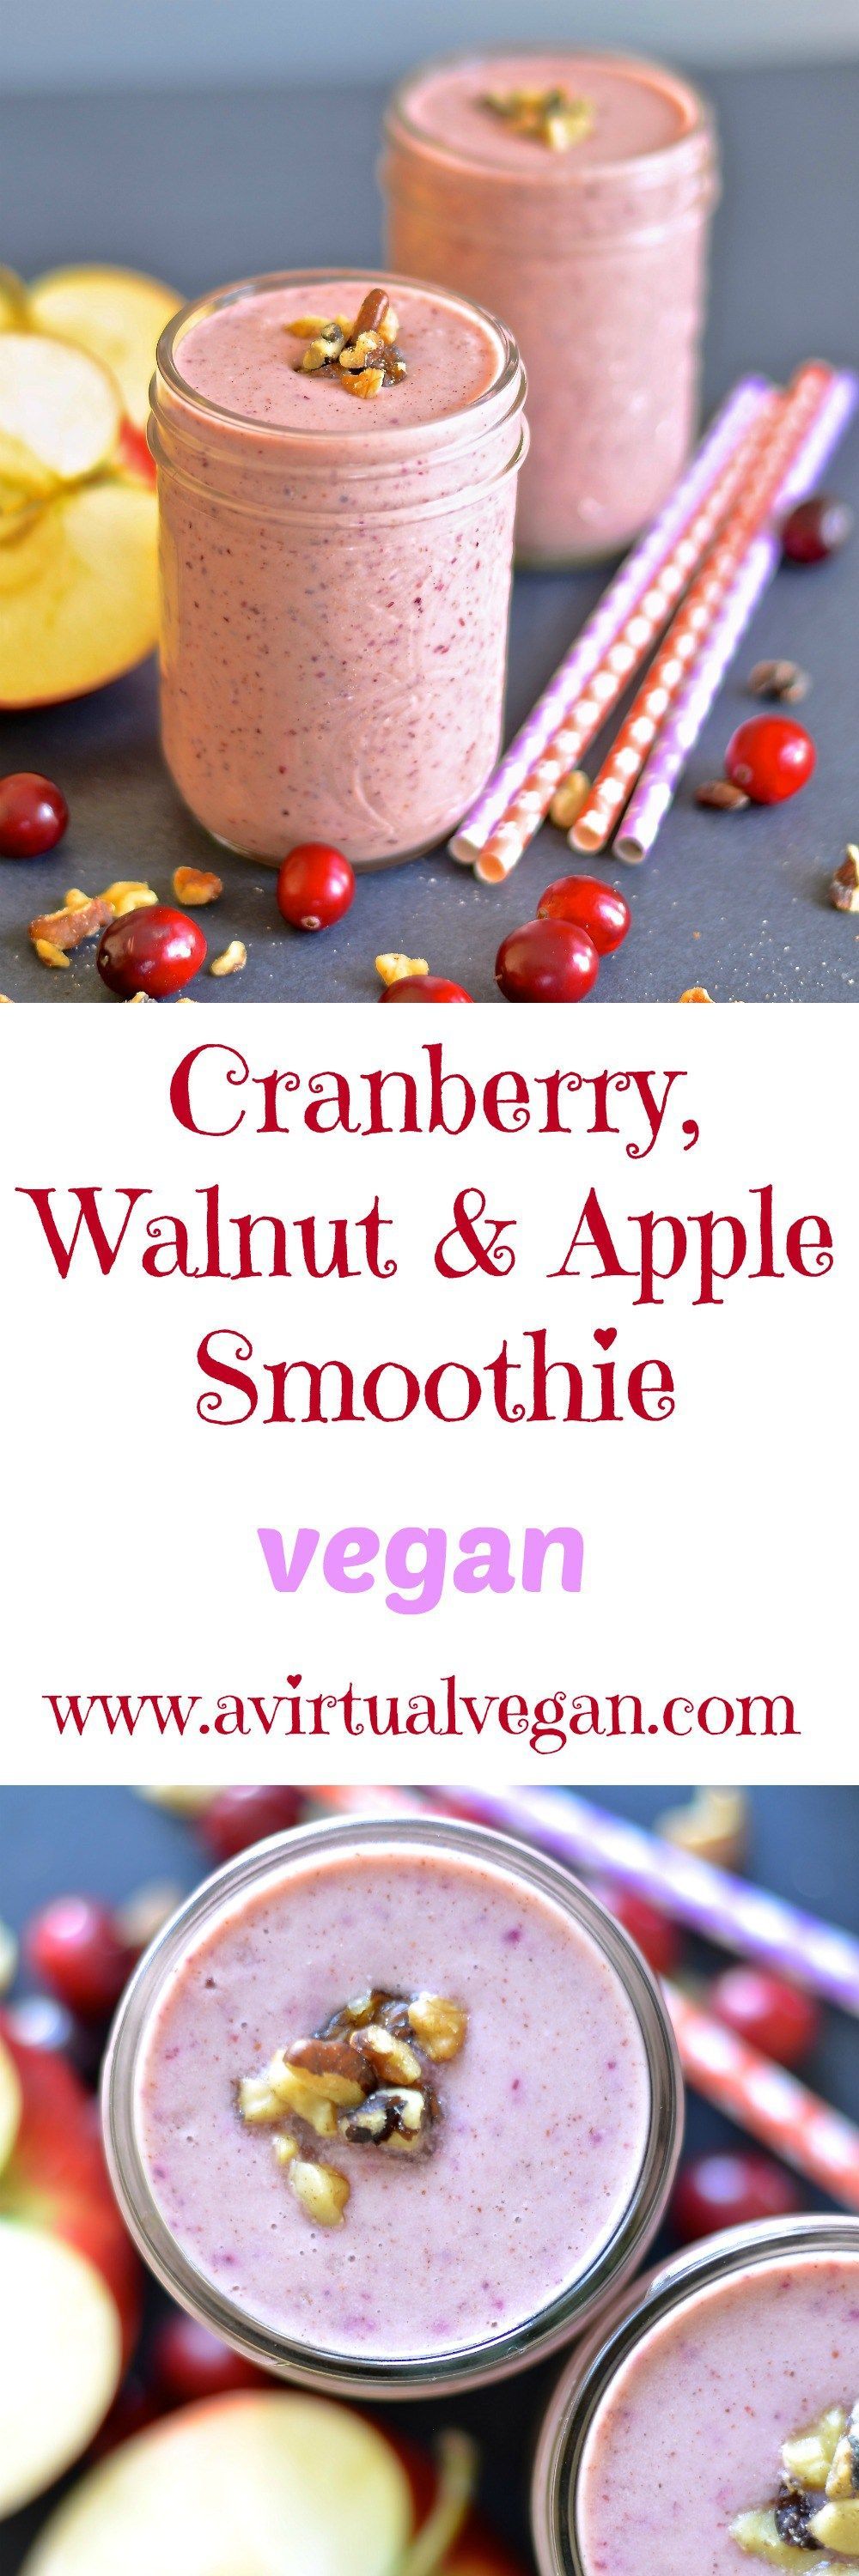 This creamy Cranberry, Walnut & Apple Smoothie is perfect for the holidays and will really hit the spot with it’s warm & spicy